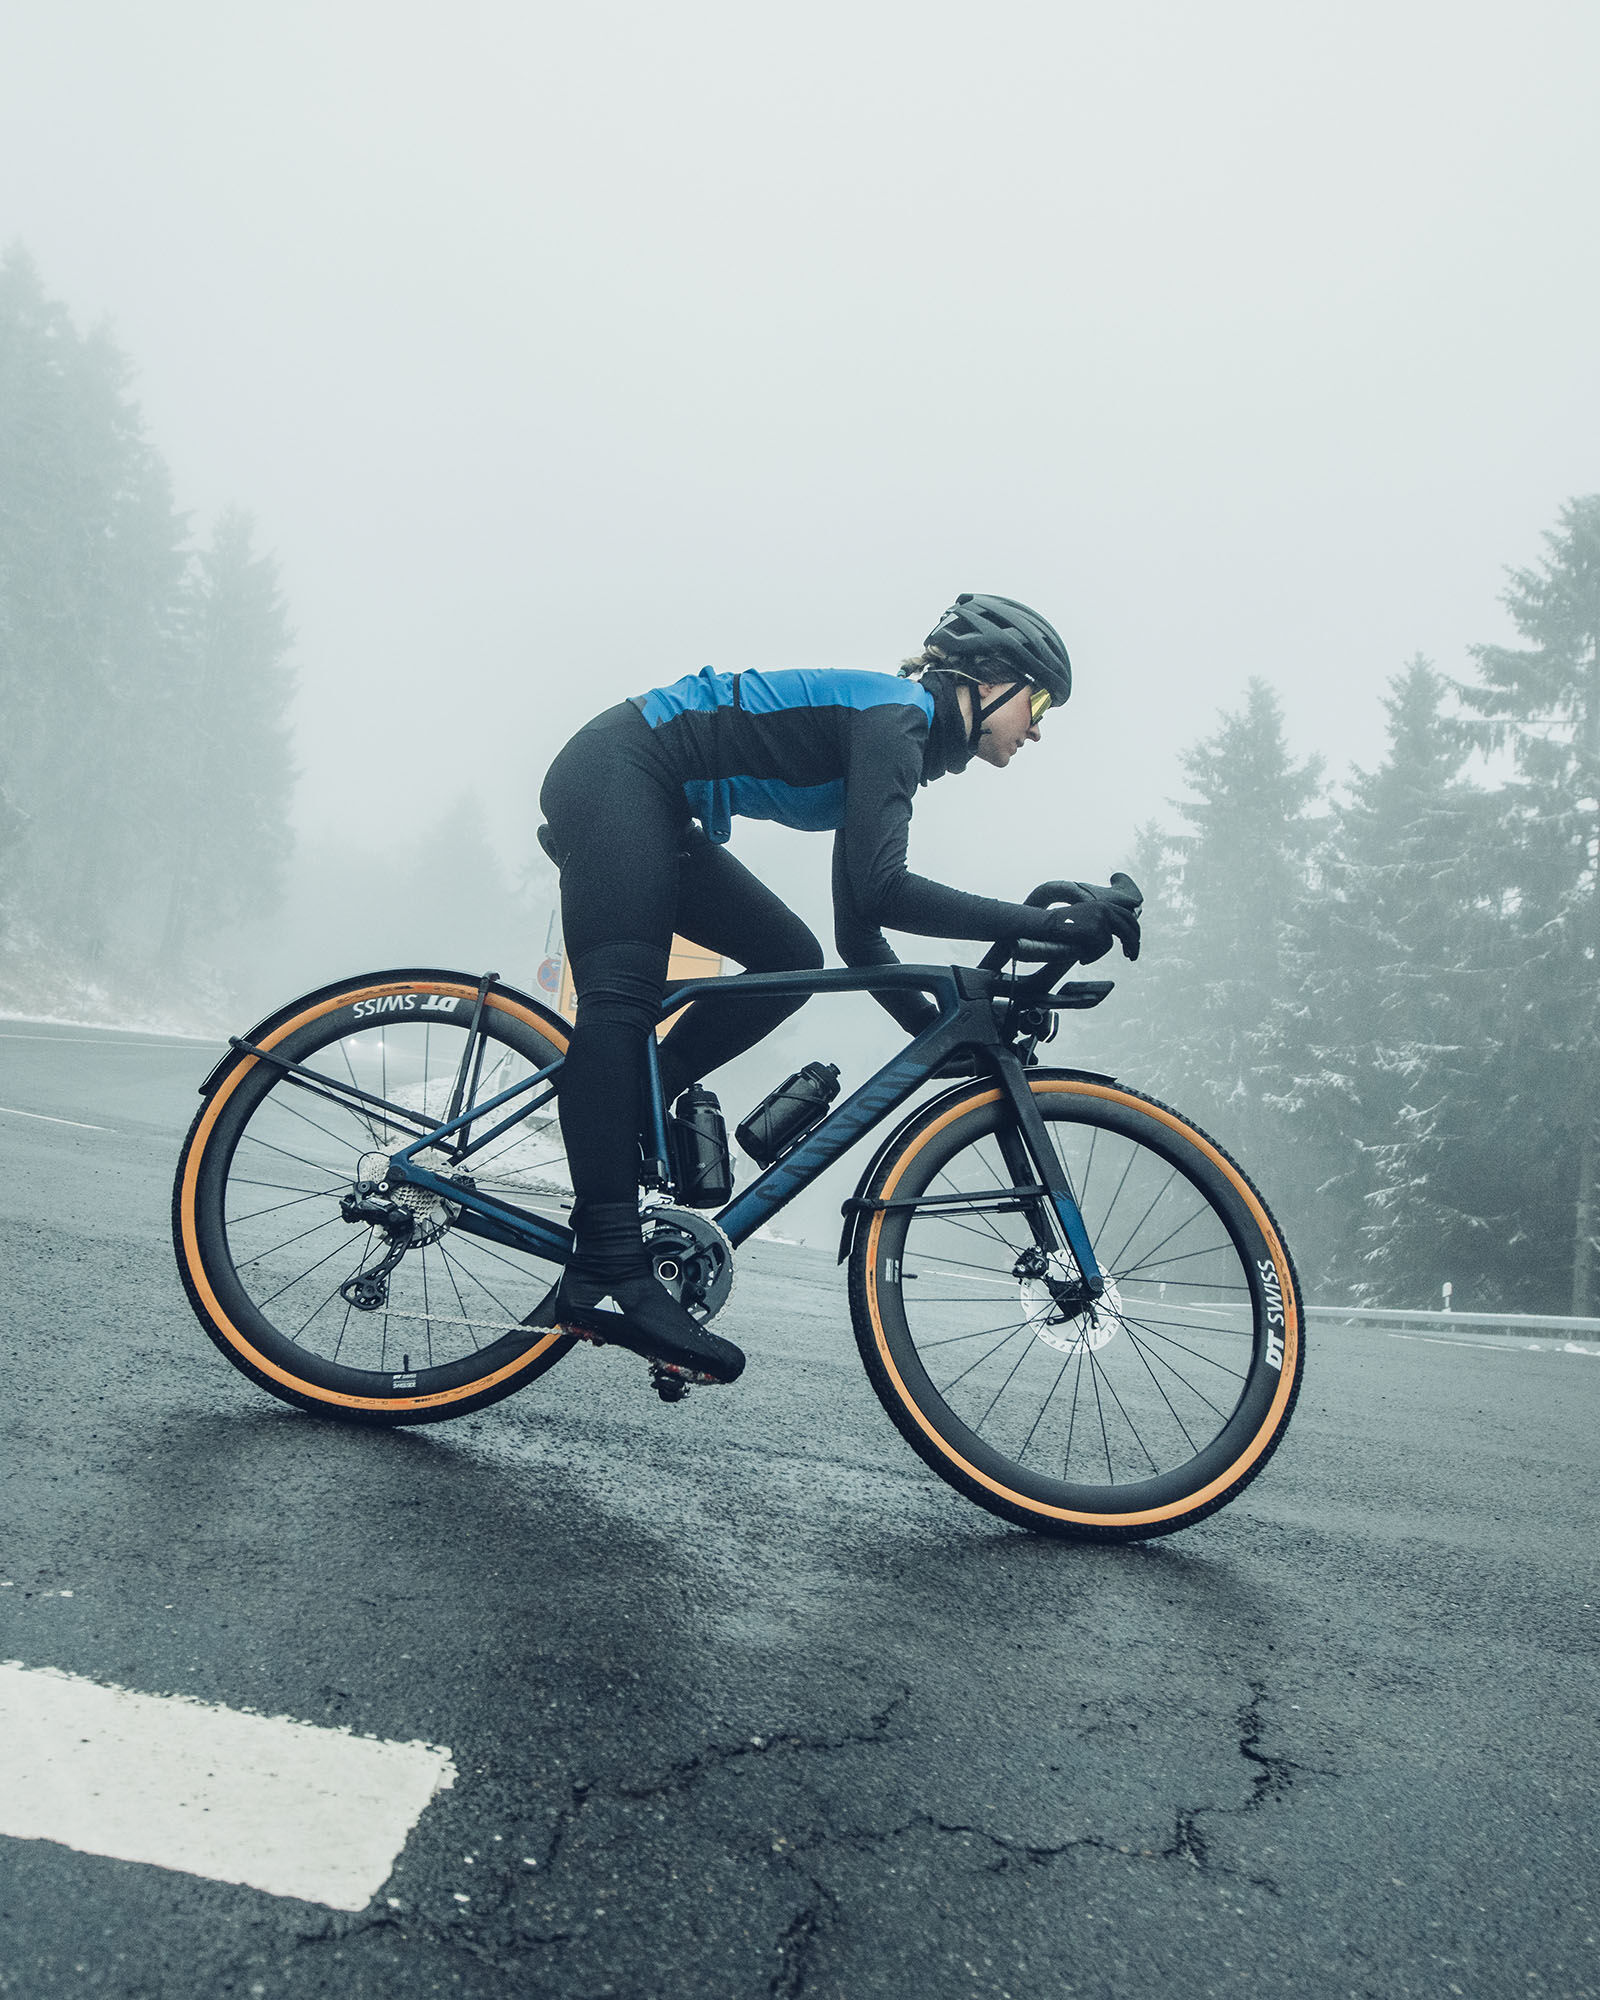 Essential winter cycling gear: What to wear cycling in winter